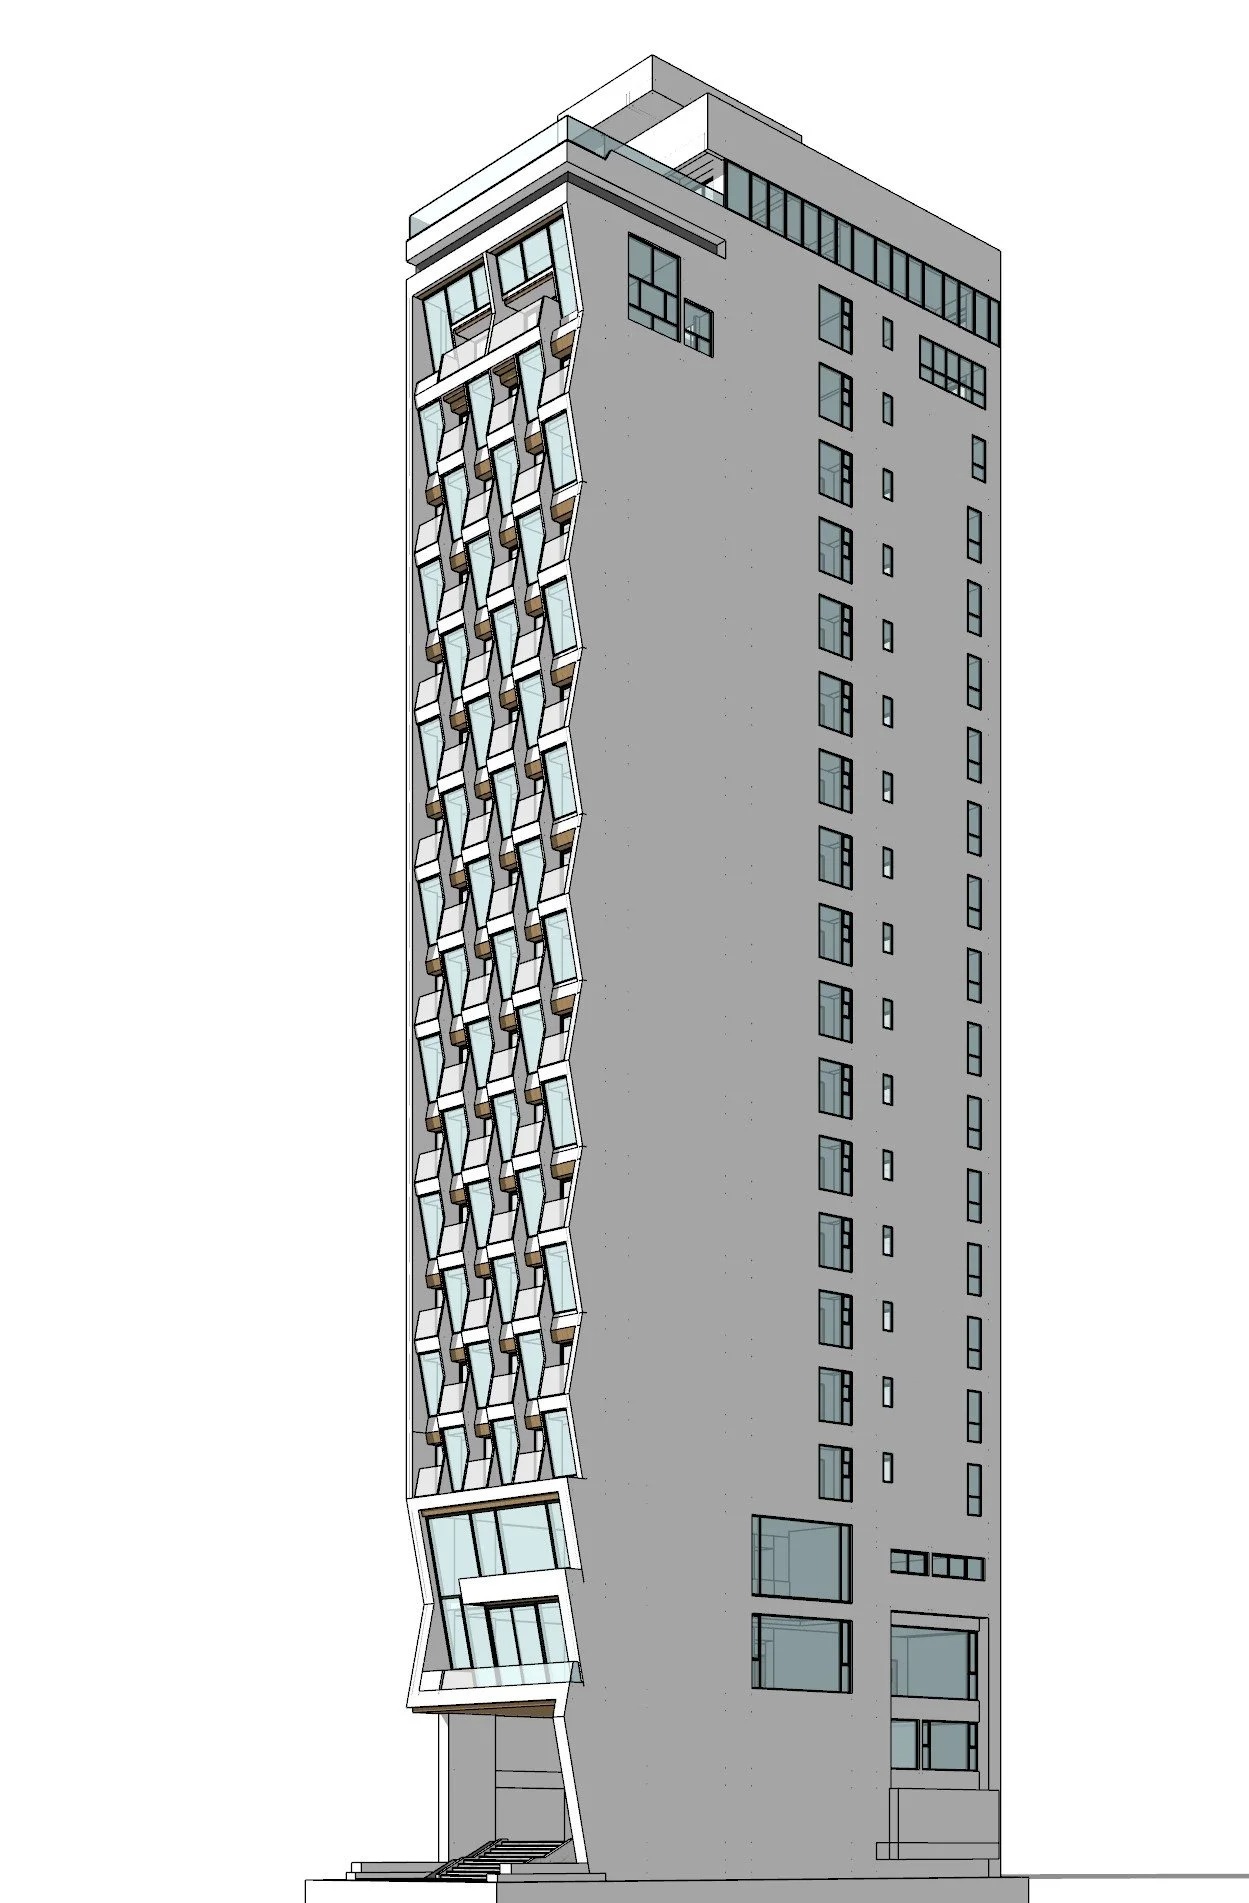 3D model in SketchUp of Le's Cham hotel.